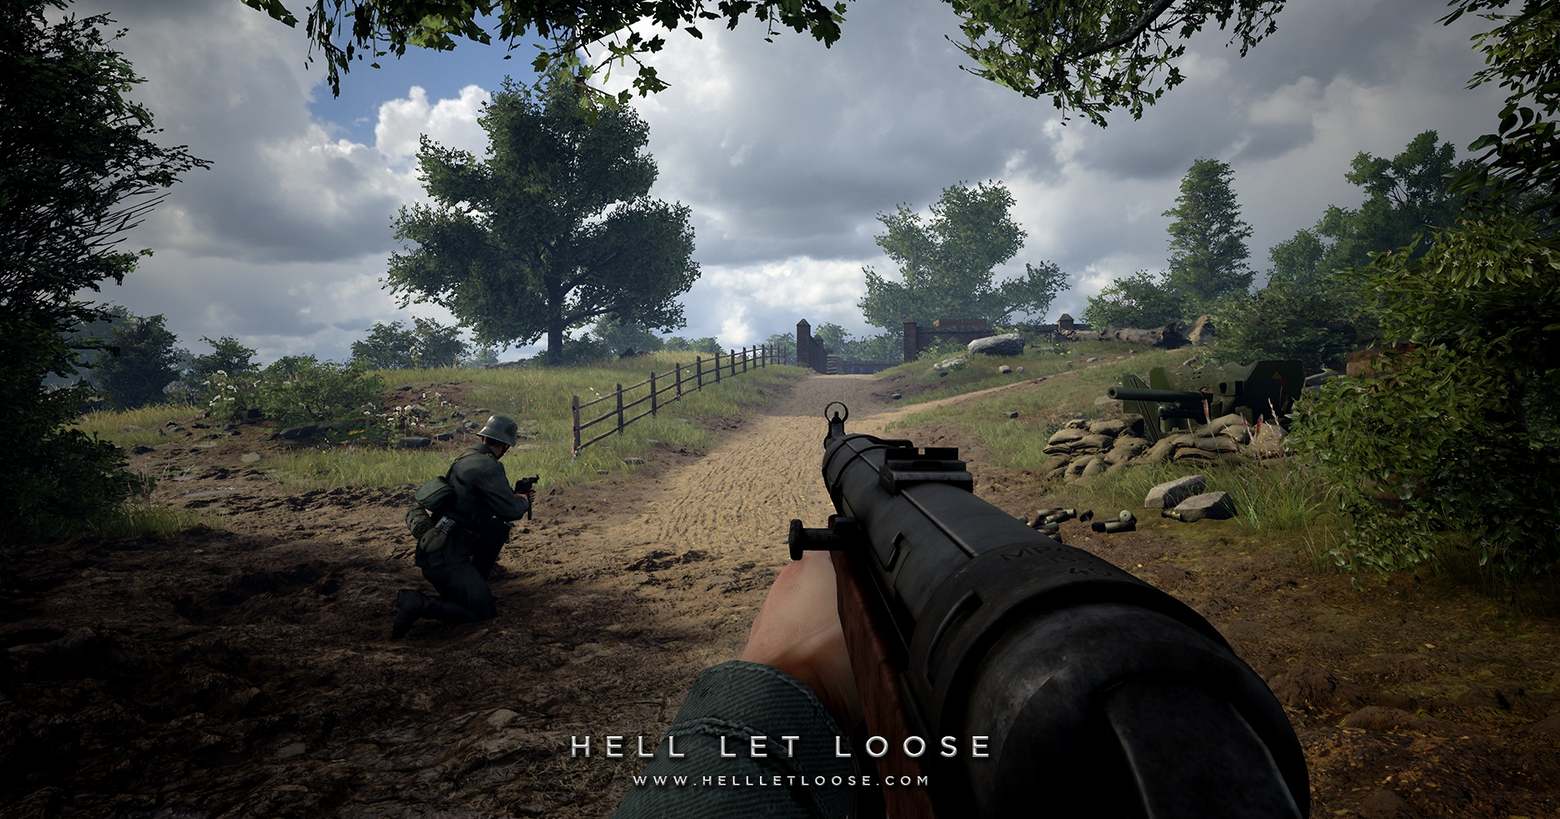 An in-game screenshot from the WWII realism shooter can be seen here. As the player, we are on the German side and are looking out in first-person view at a sandy country road, on which we ourselves are also standing. The sun is shining. To the left of the road, a little further ahead of us, kneels a German comrade who, like us, holds an MP40 in his hands and is also looking up the road. On the left and on the right green meadows, brownstones several green trees fill the picture. To our right, an anti-tank gun is pictured behind a sandbag barricade. The road in the background leads to some kind of brown masonry, which could represent an enemy base. Improve your fighting skills in Hell Let Loose with helpful tips on gameplay.